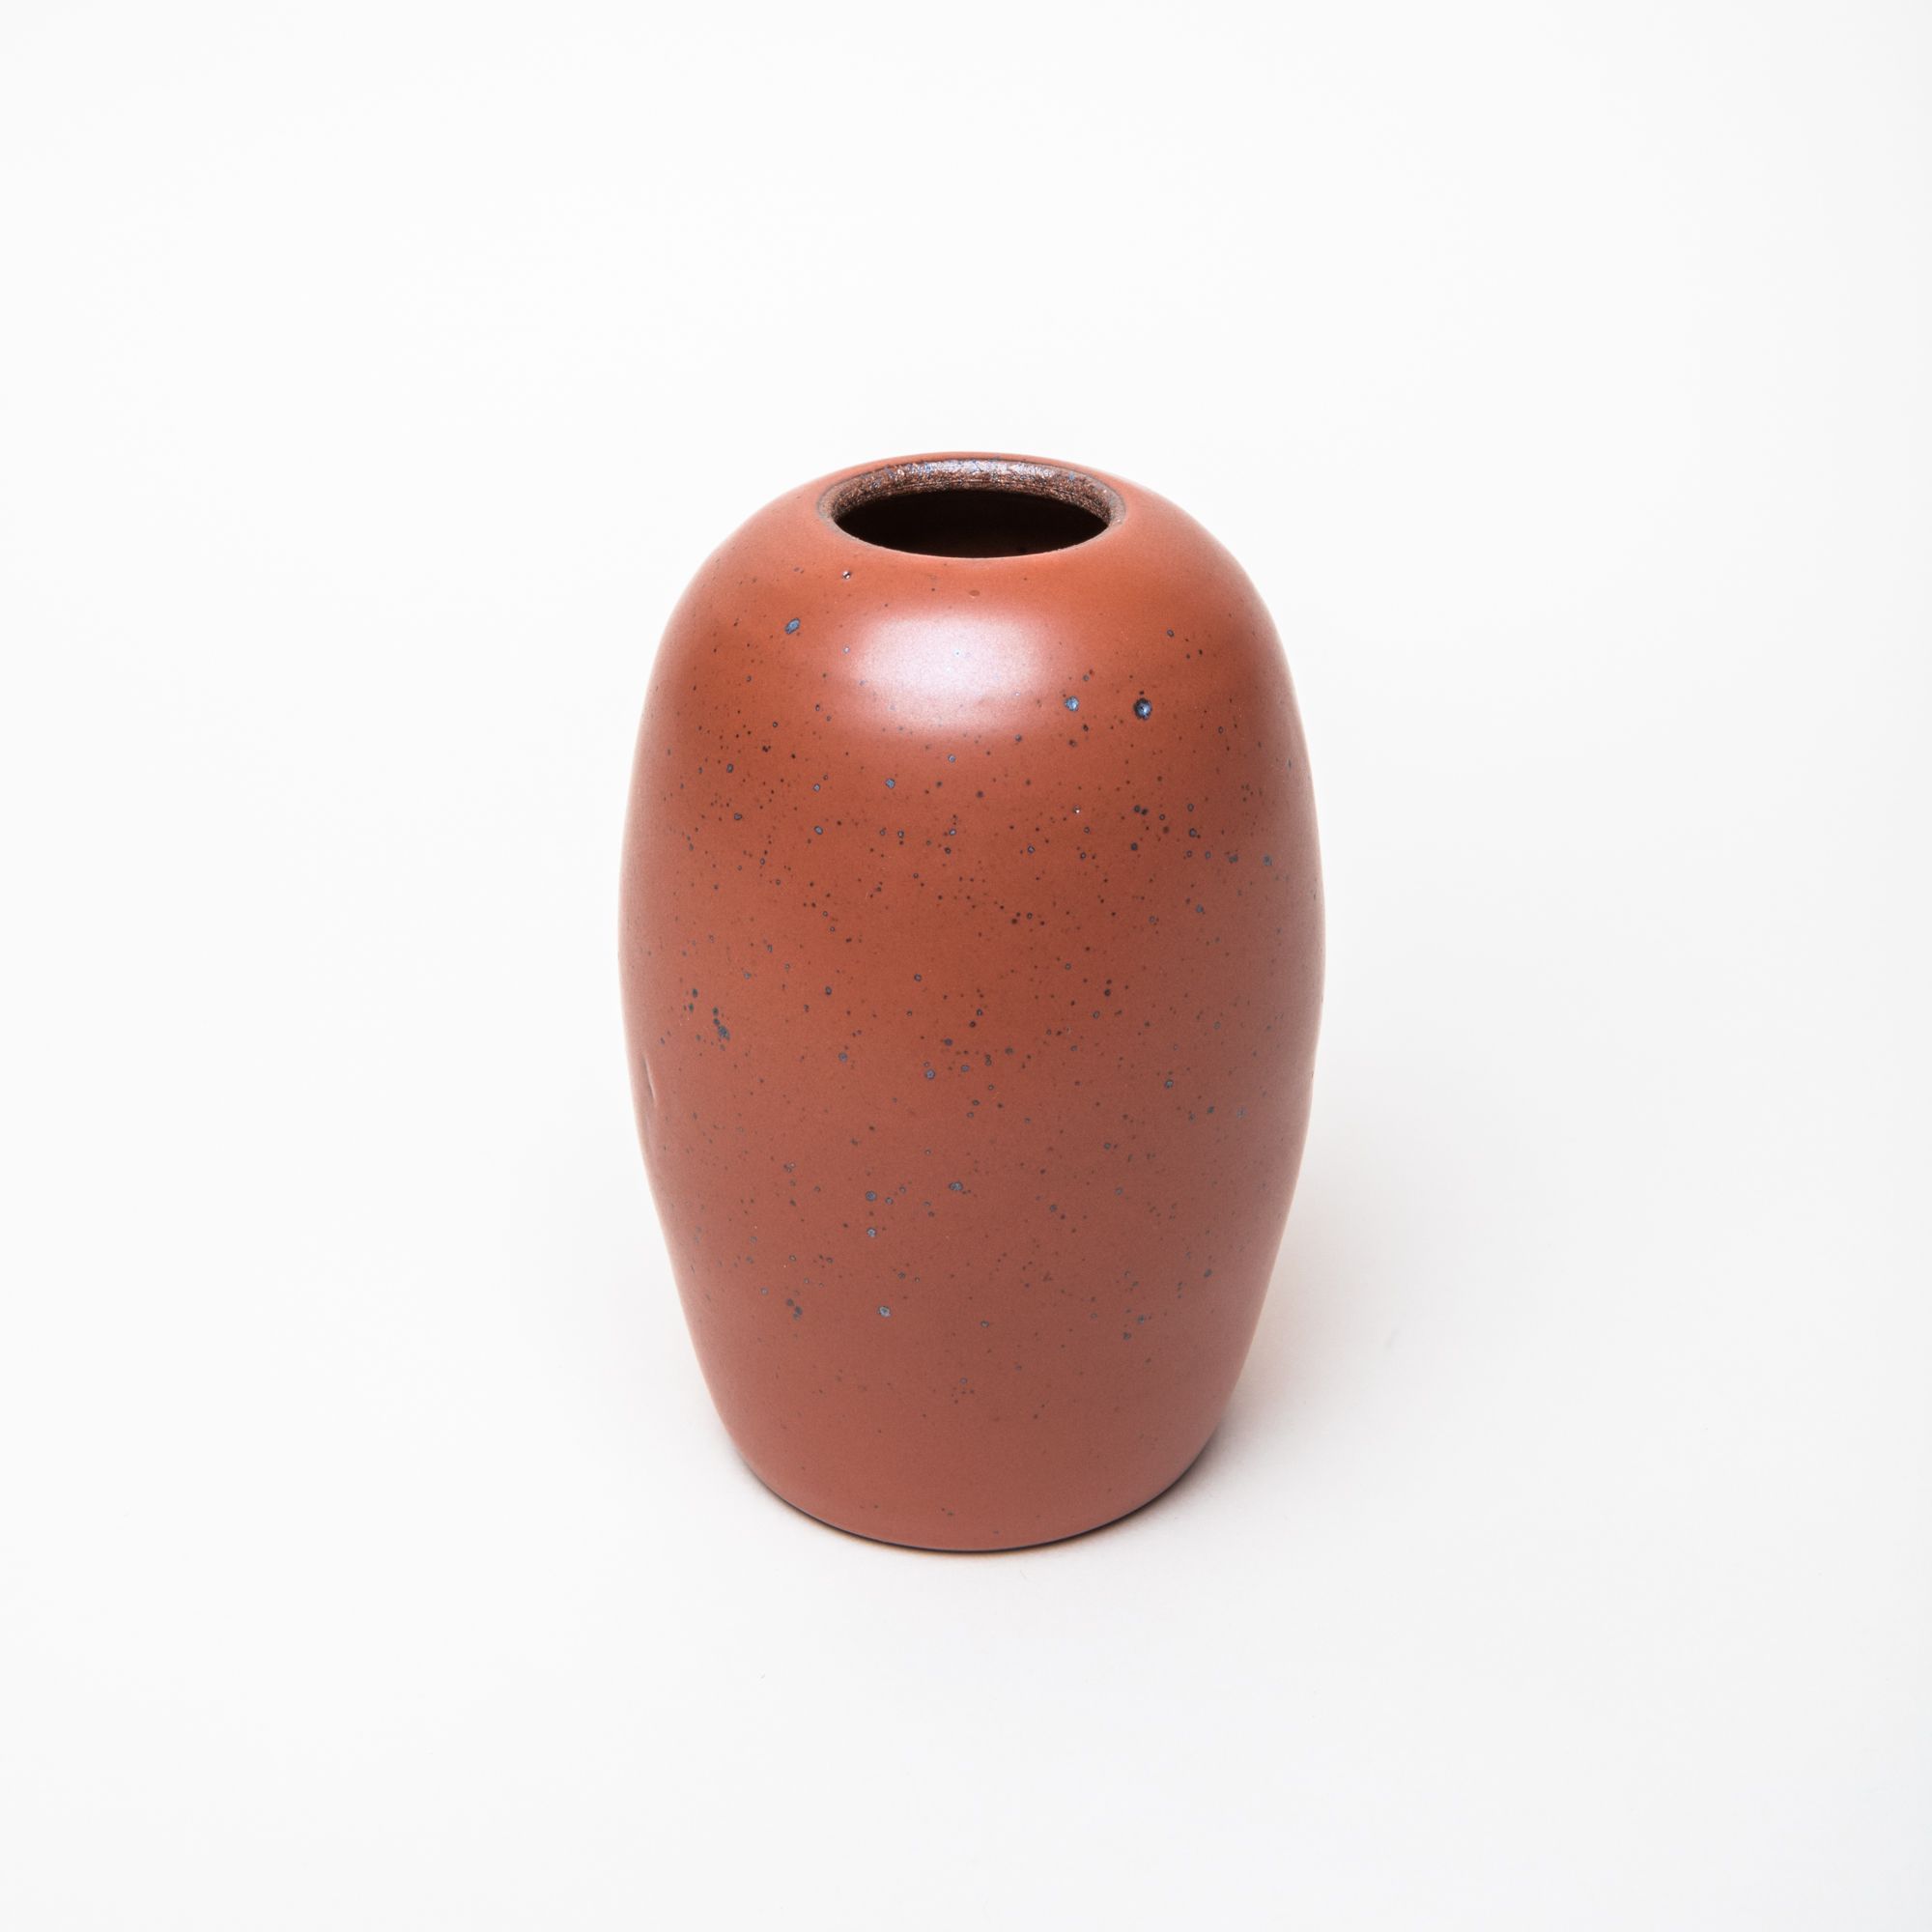 A ceramic vase in a cool burnt terracotta color featuring iron speckles with a long oval body and small opening on top